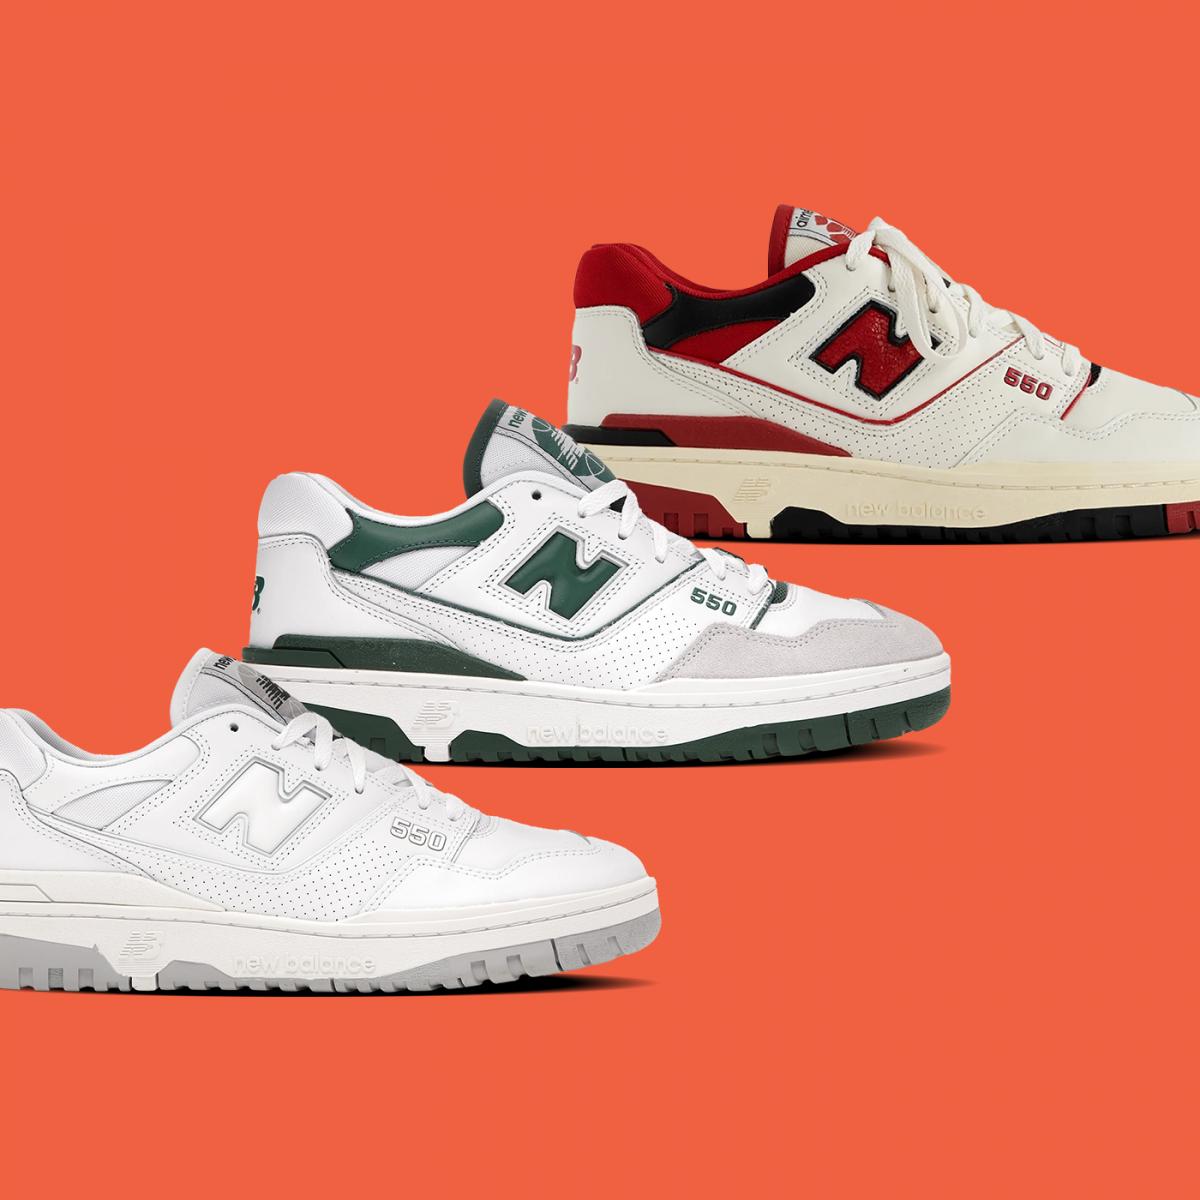 The New Balance 550s are back and we know where you can get them